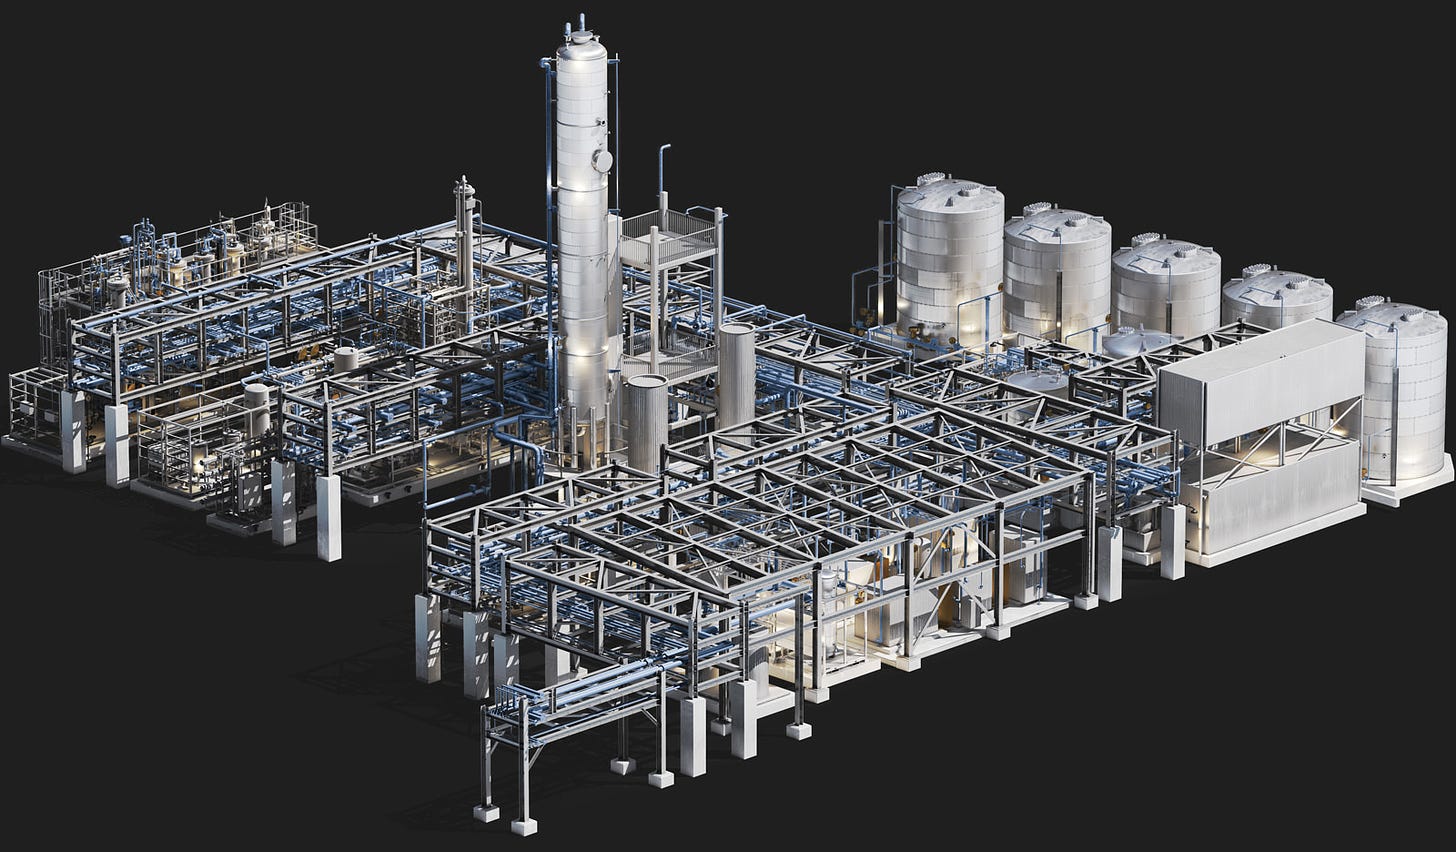 3D rendering of the Bioforge